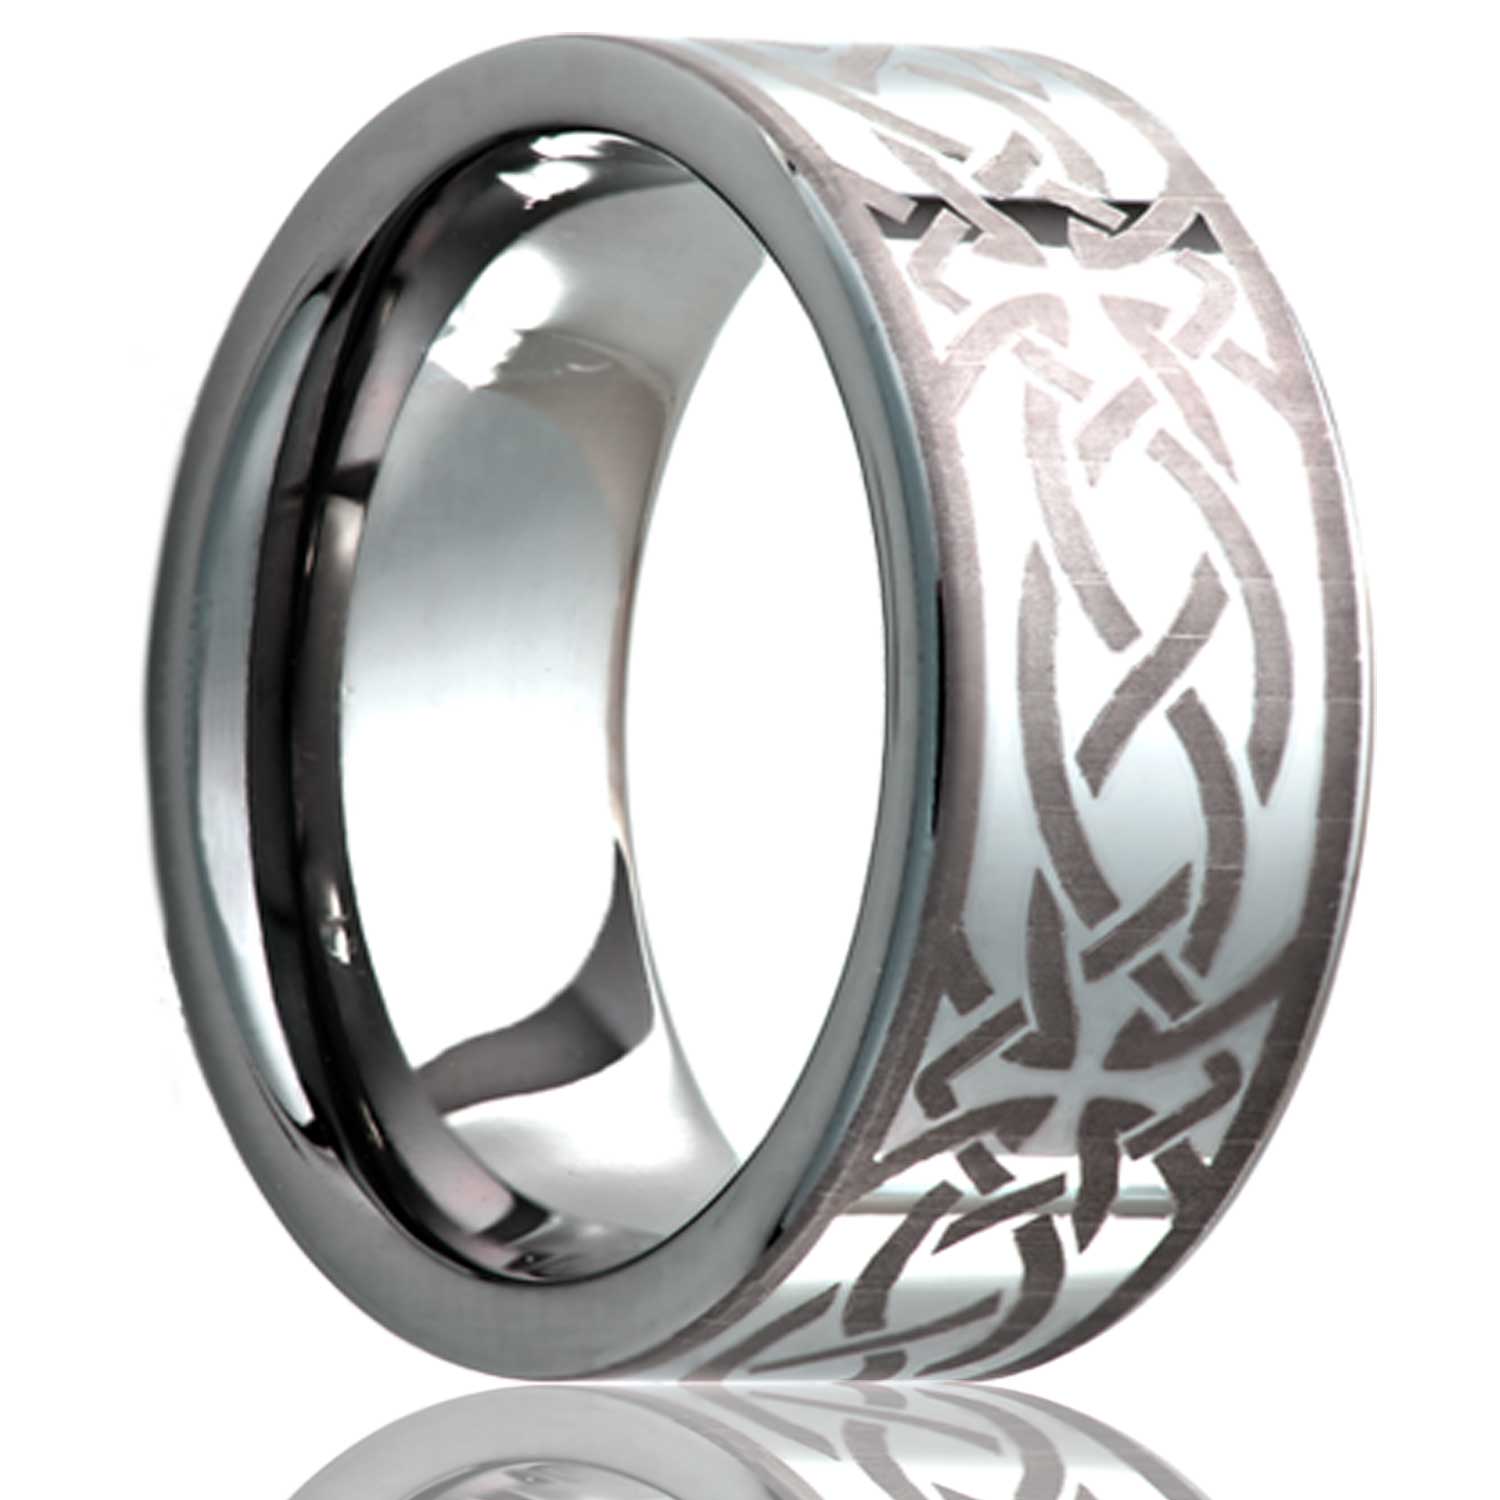 A celtic cross knot tungsten wedding band displayed on a neutral white background.